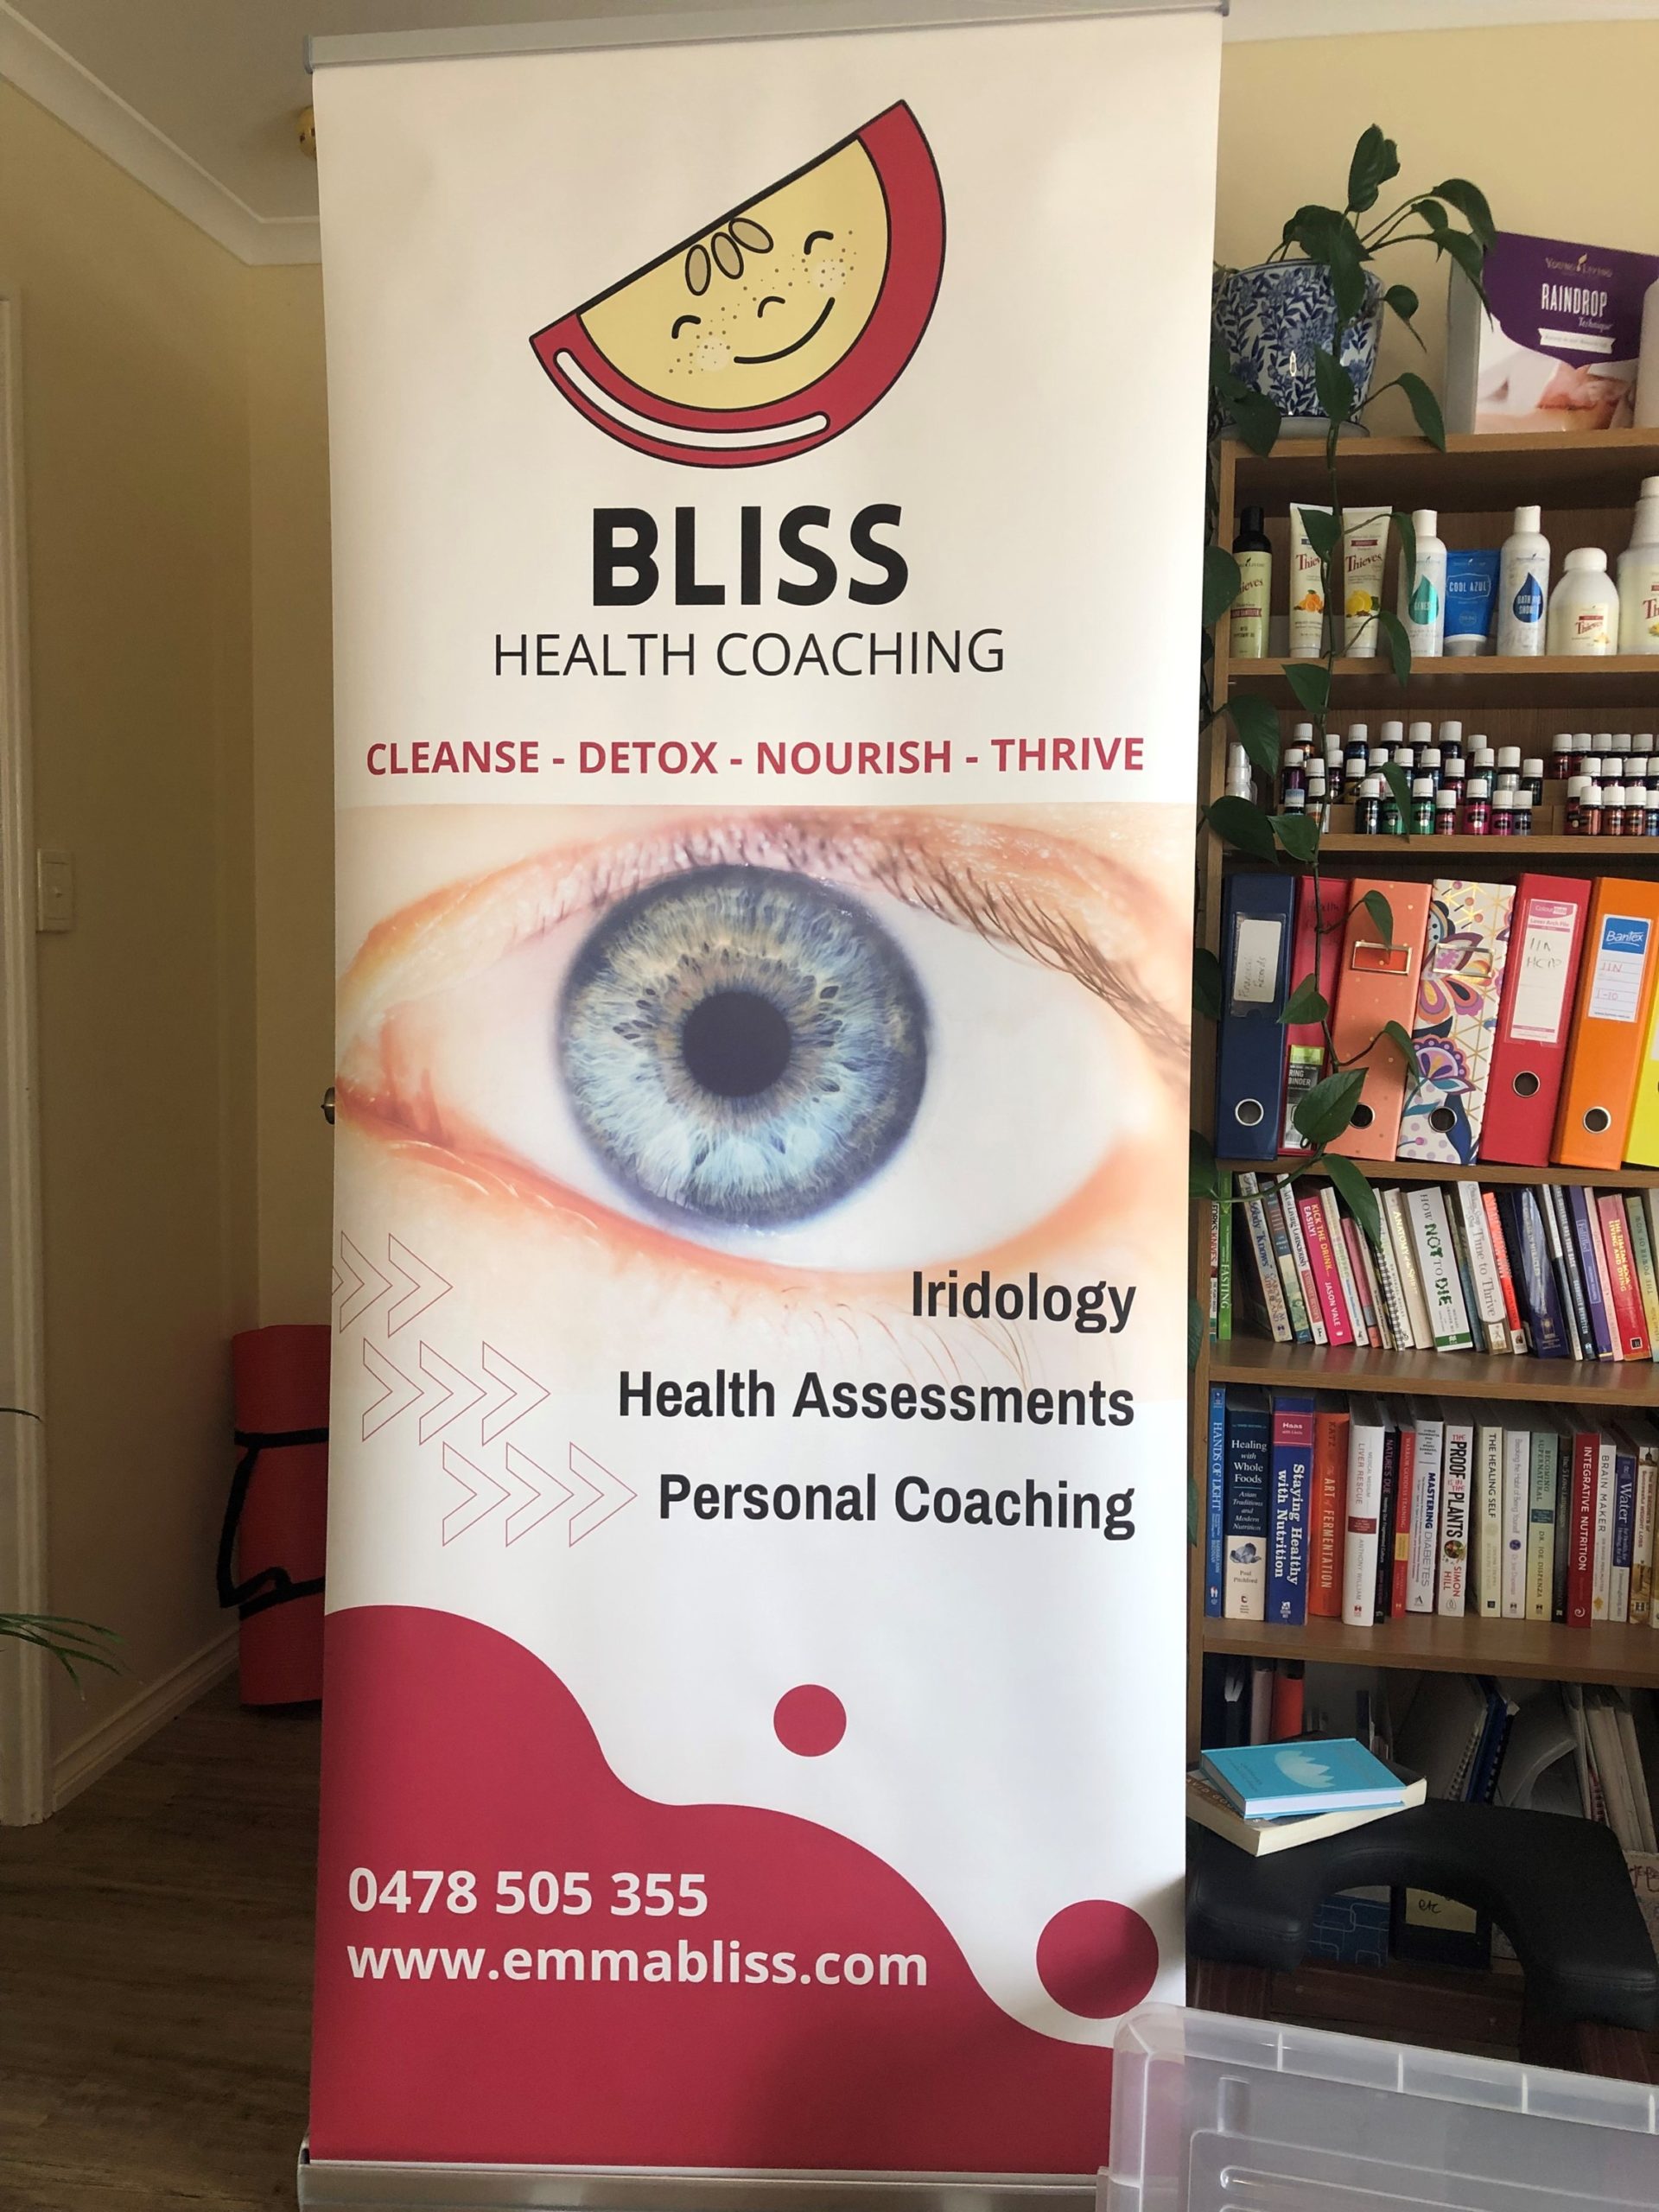 Bliss Health Coaching Vertical Banner in front of office bookcase.